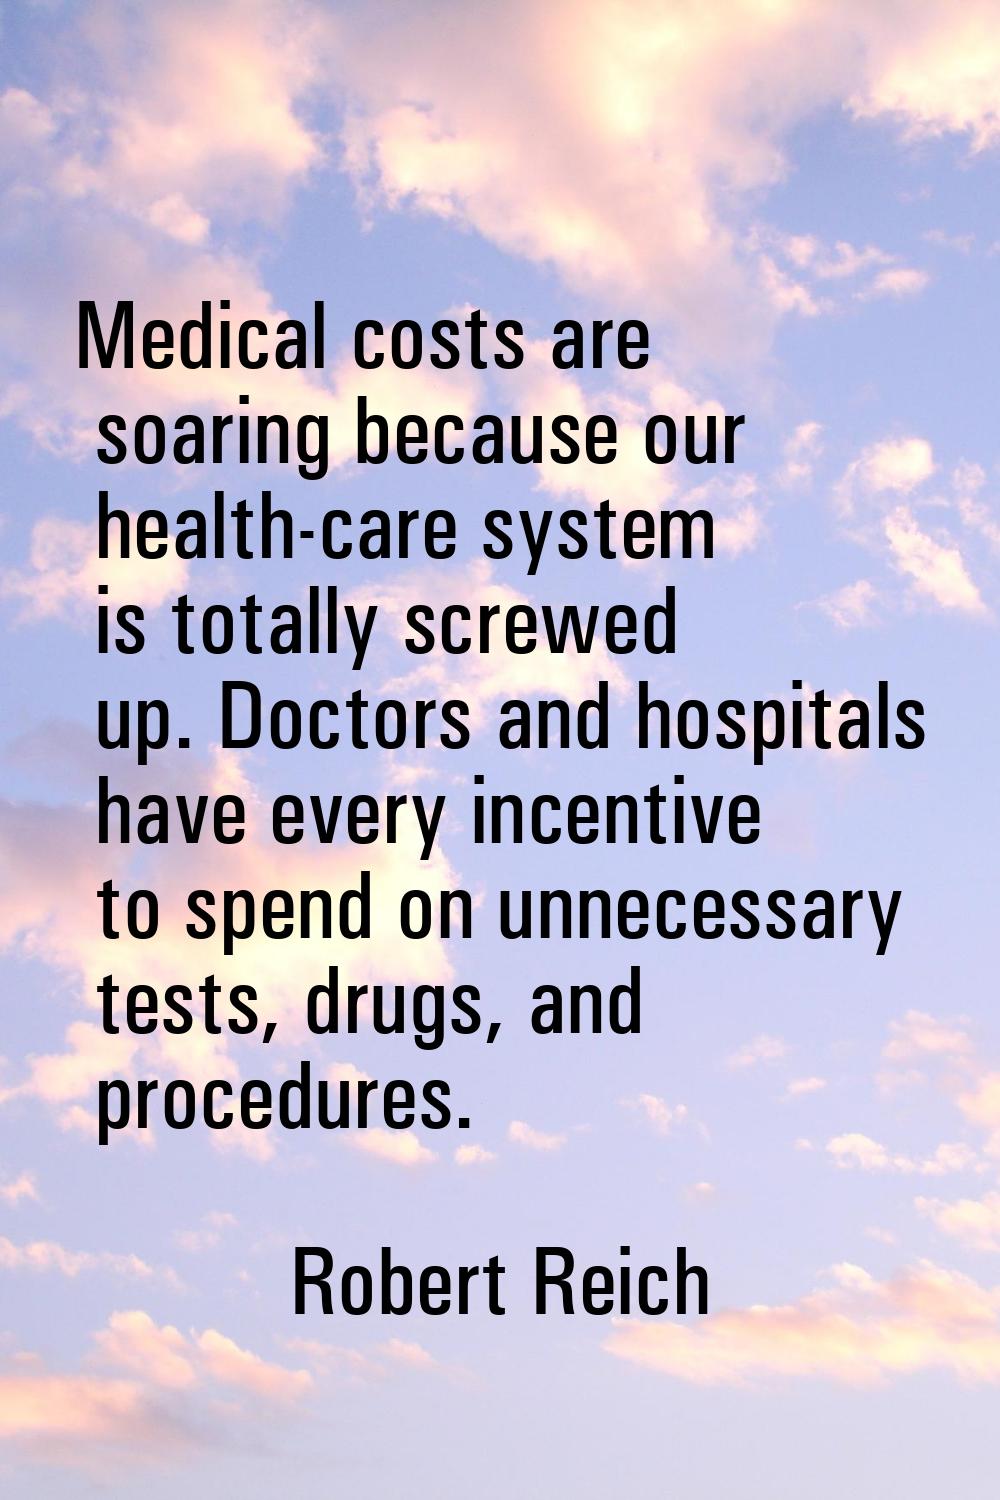 Medical costs are soaring because our health-care system is totally screwed up. Doctors and hospita